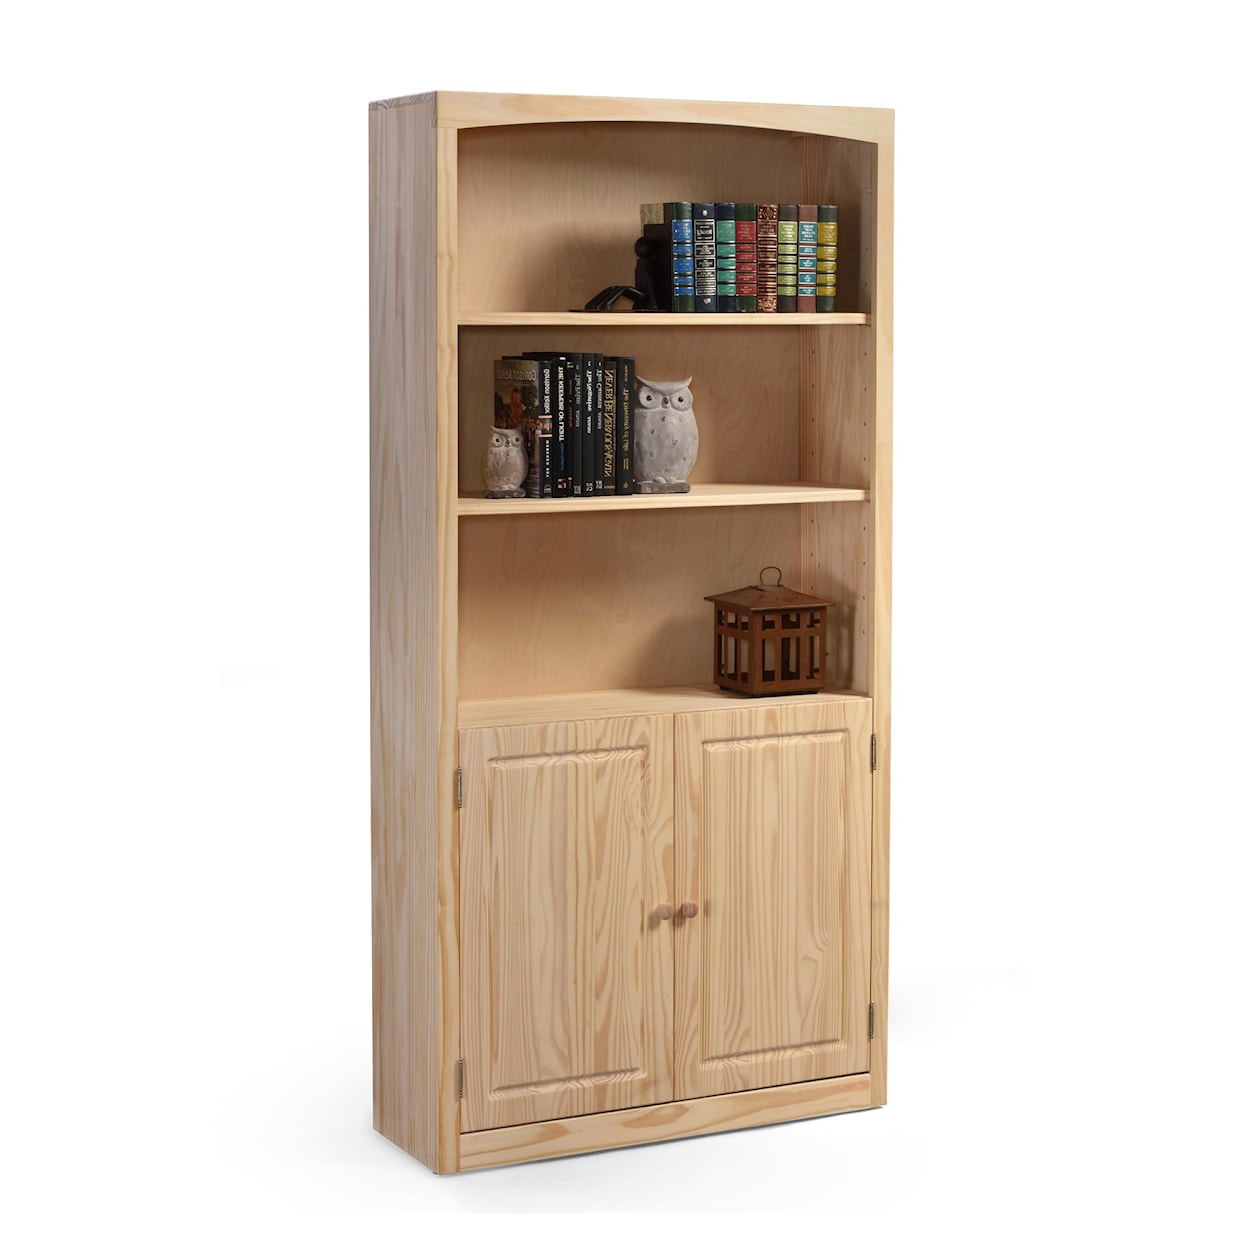 Archbold Furniture Pine Bookcases Bookcase 36 X 72 with Door Kit